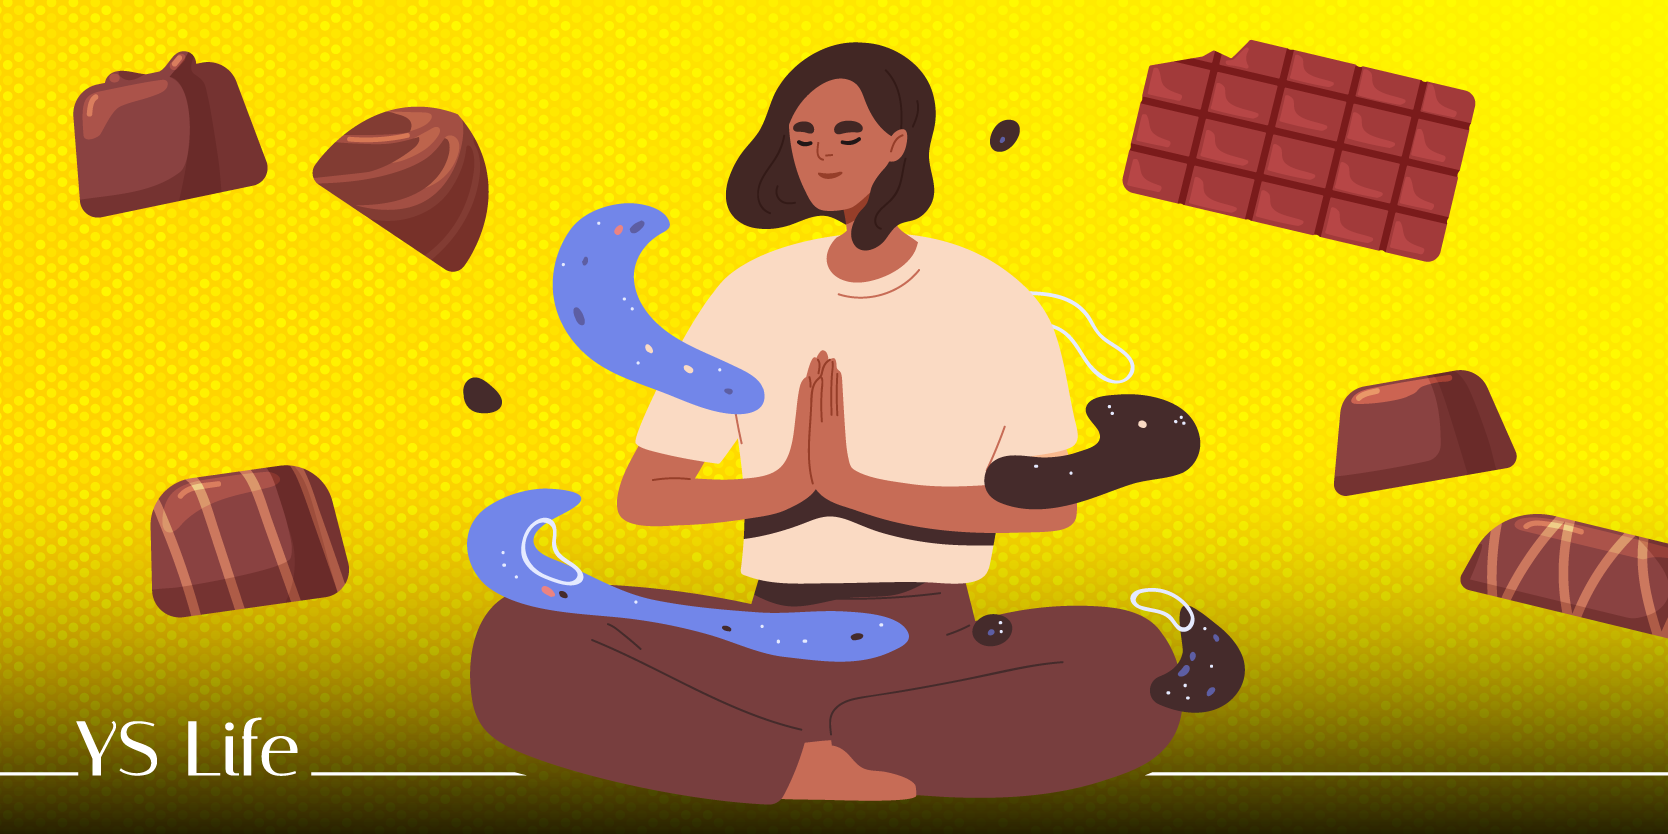 Chocolate meditation, the mindfulness exercise that helps reduce stress and anxiety